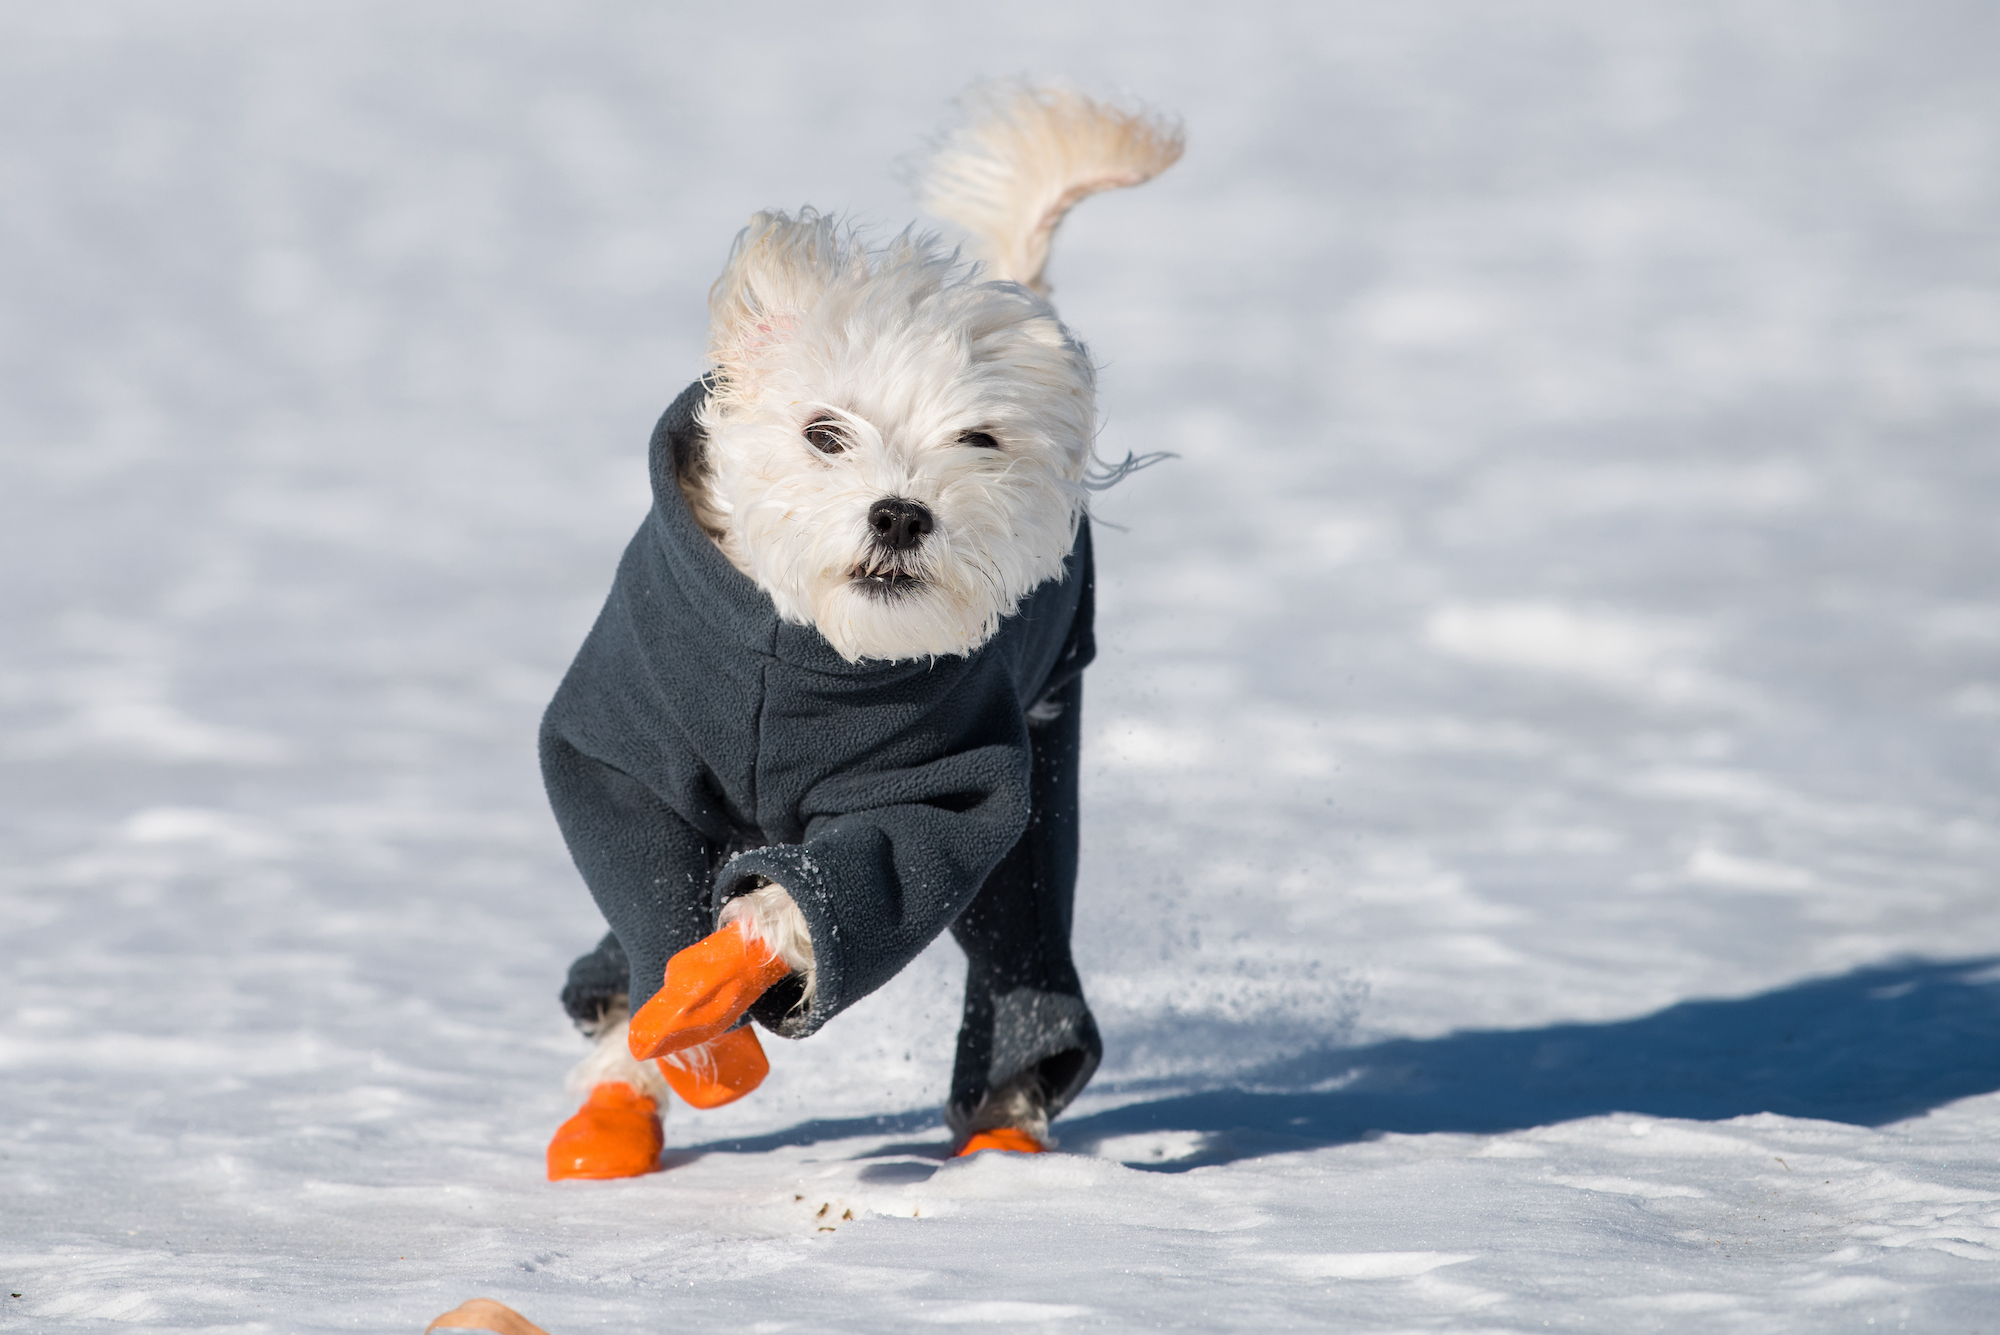 Dog Booties Waterproof Dog Hiking Shoes Dog Boot For Small Size Dogs, Puppy  Shoes For Hot Pavement Winter Snow